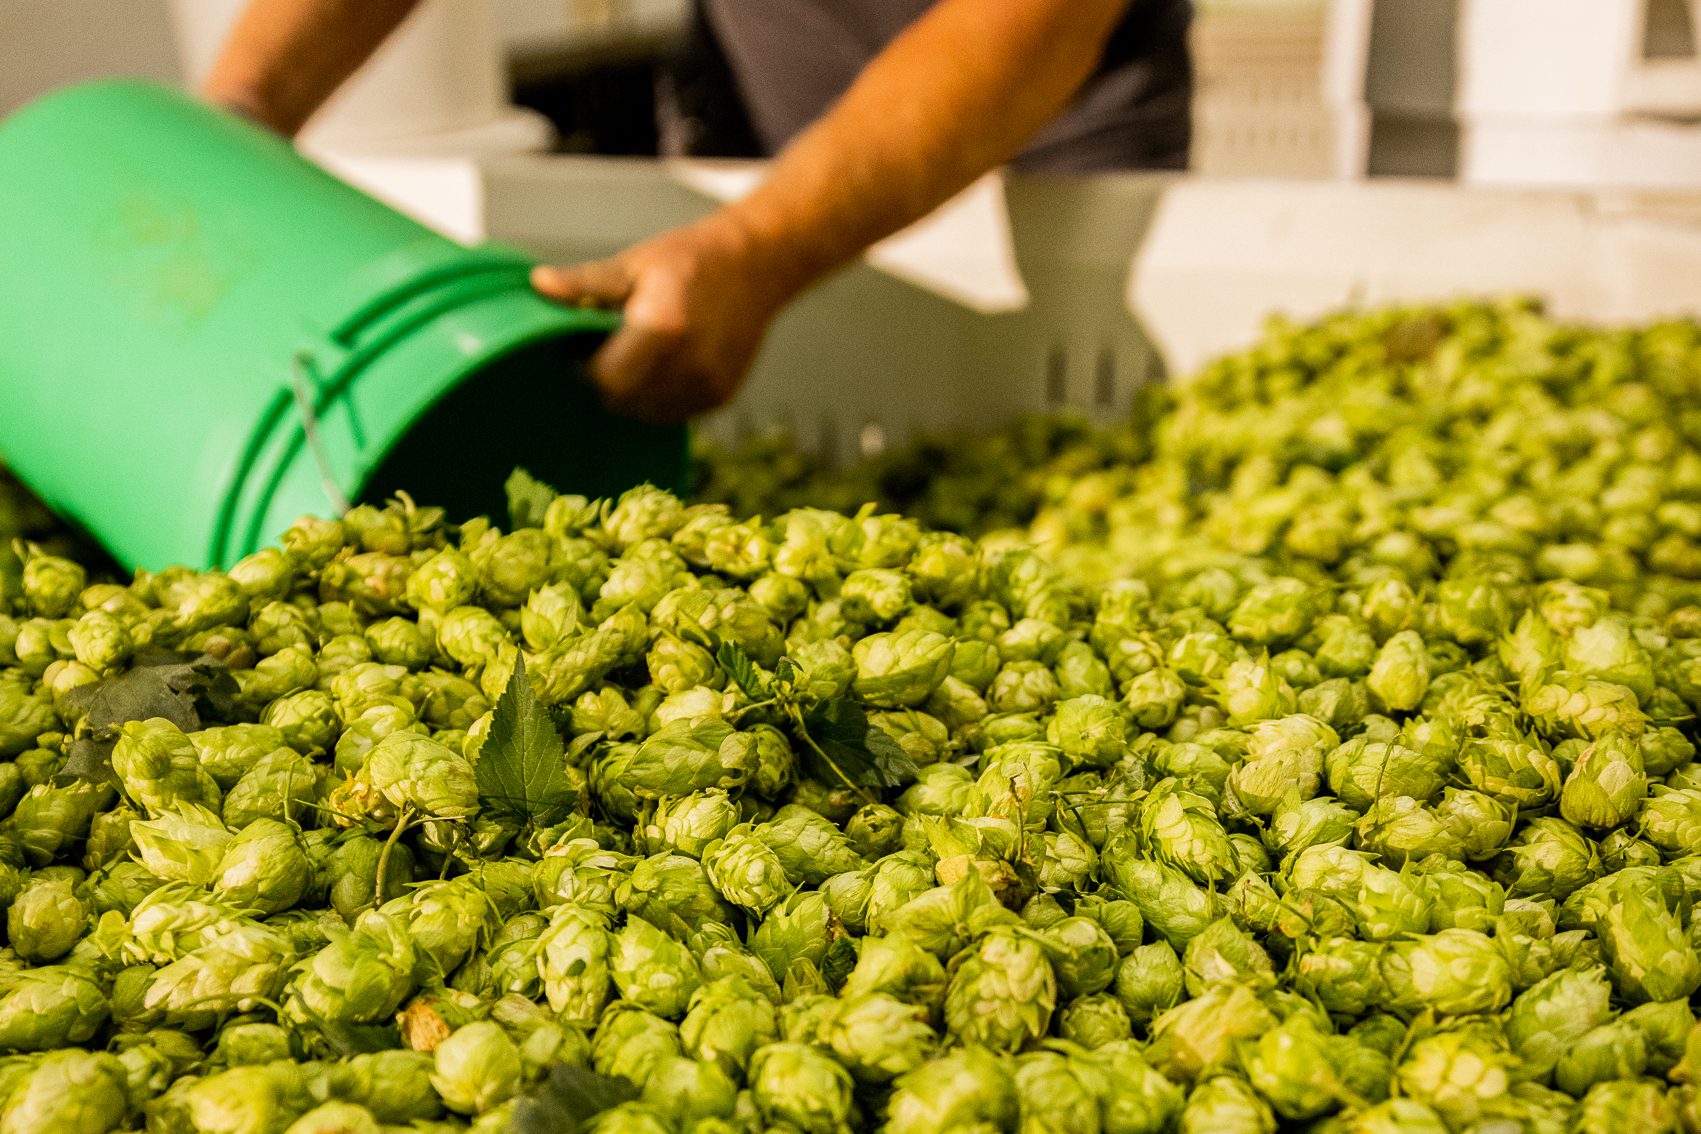 Dipping a bucket into a pile of wet hops